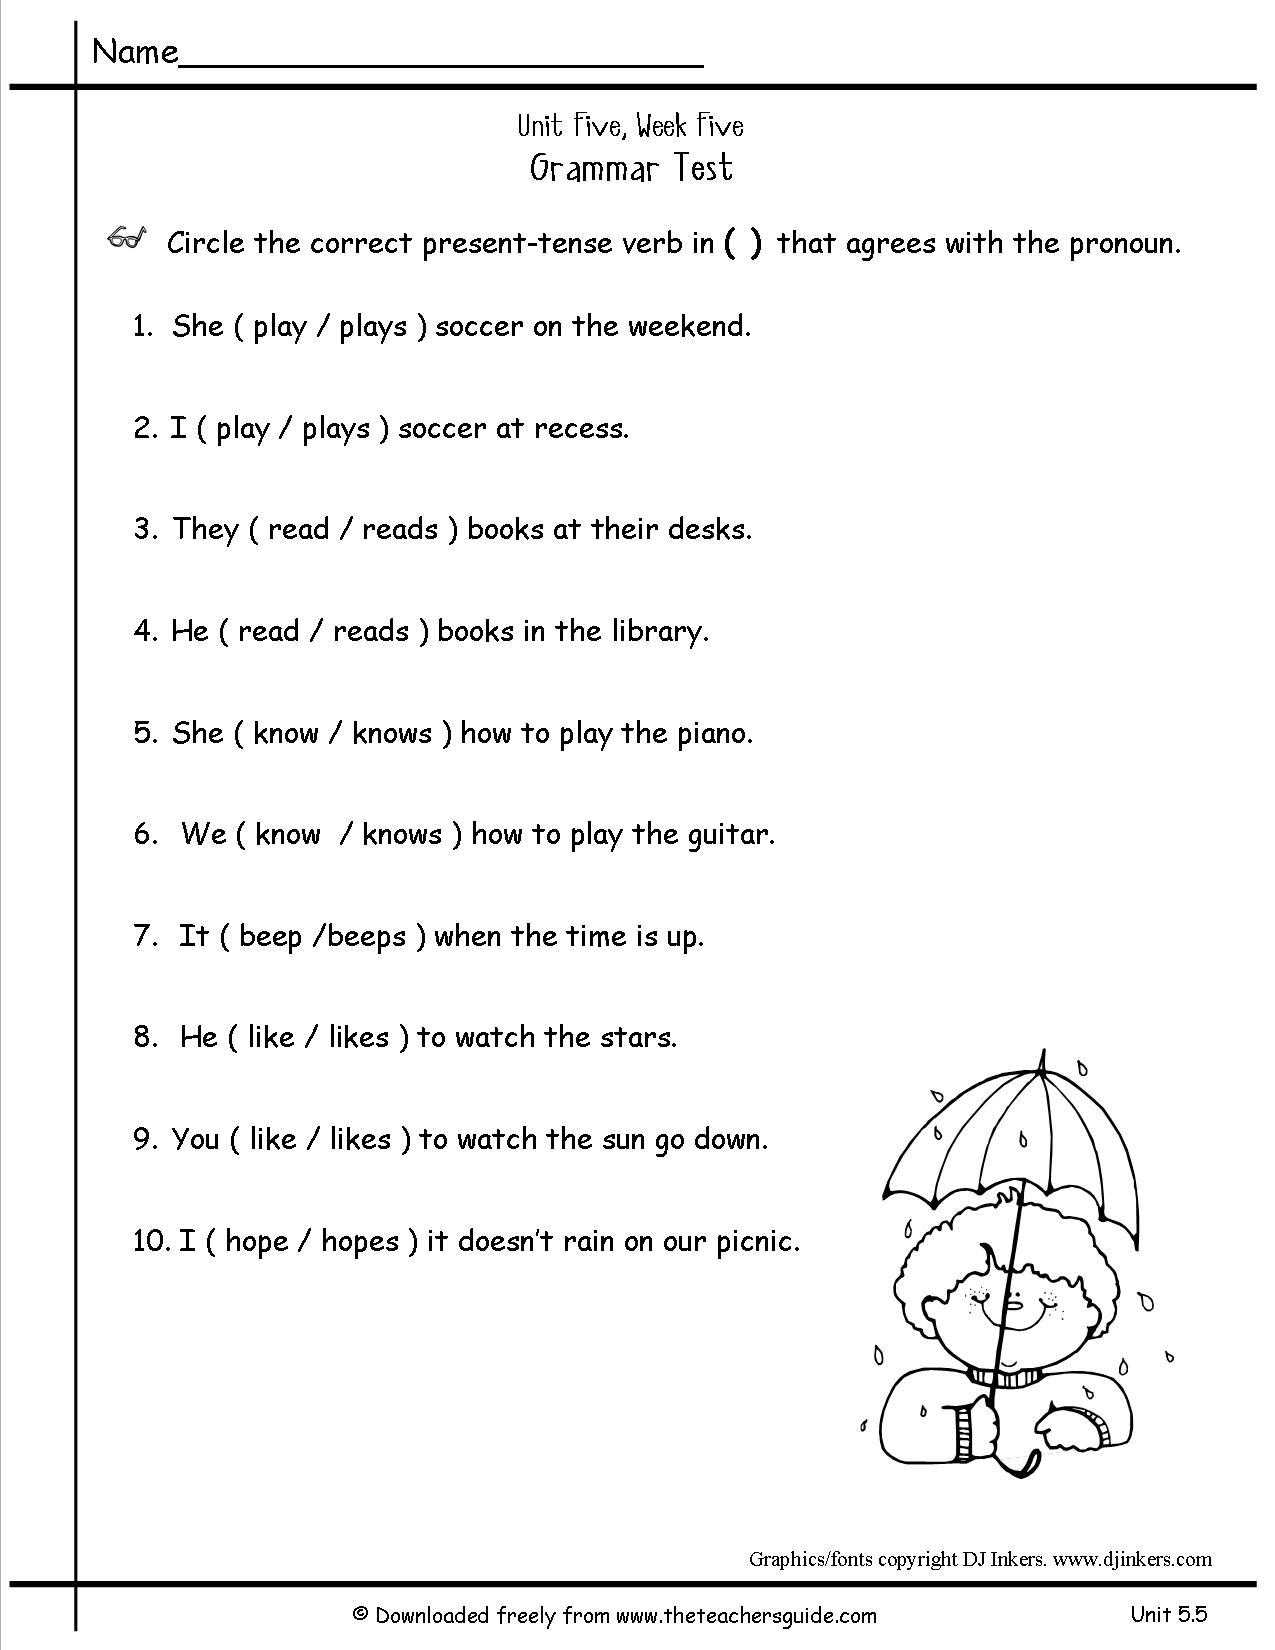 Subject Verb Agreement Practice Worksheets Along with Irregular Verbs Worksheet 10th Grade